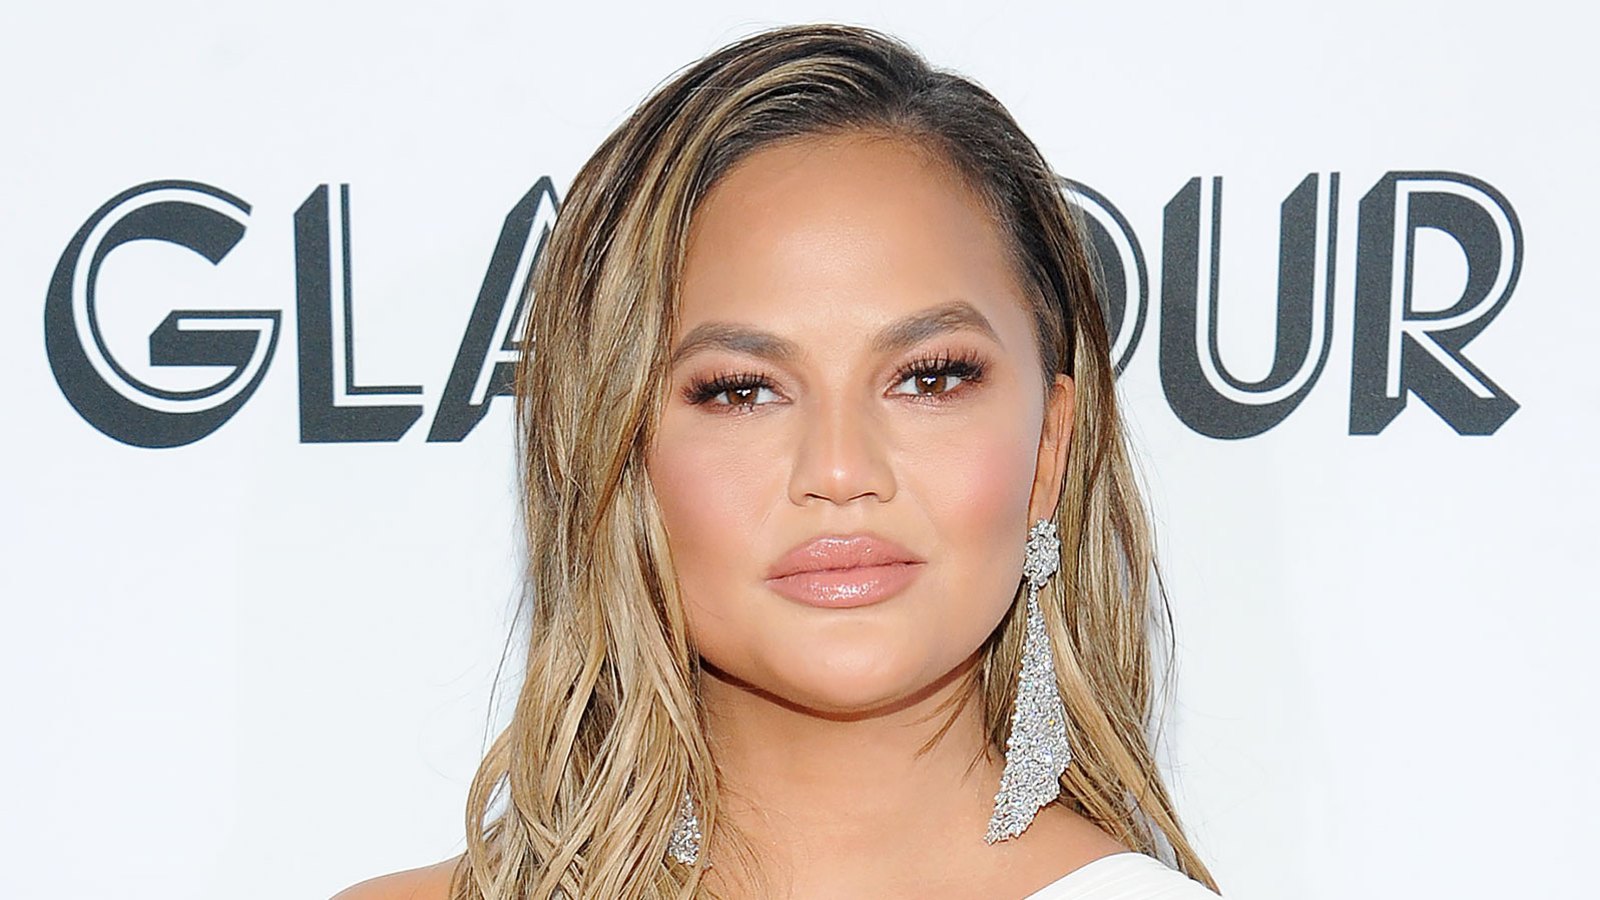 Forget the Wig! Chrissy Teigen Just Dyed Her Hair Pink